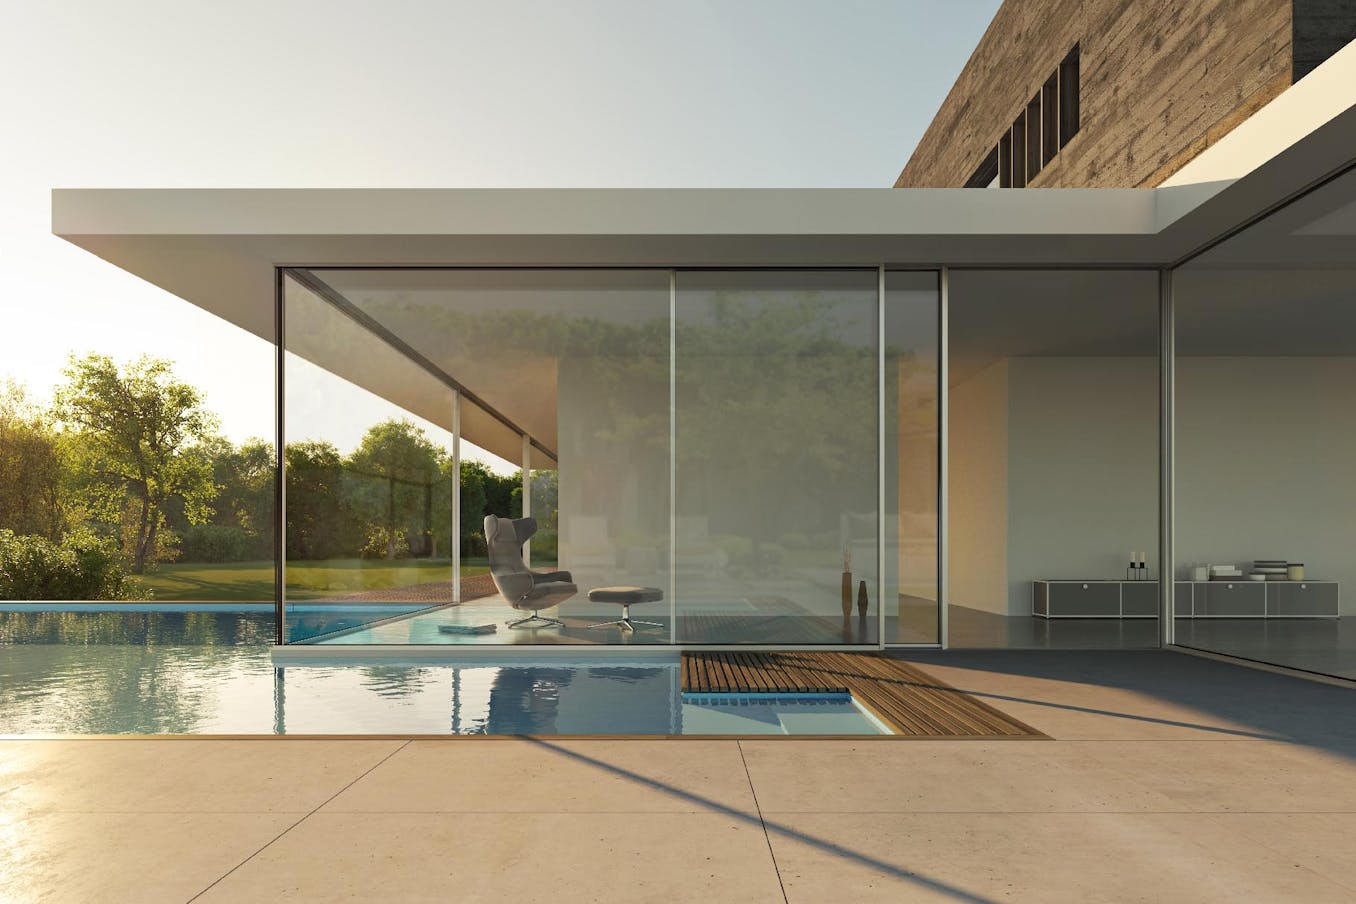 cero minimal moveable glass walls - opening exterior